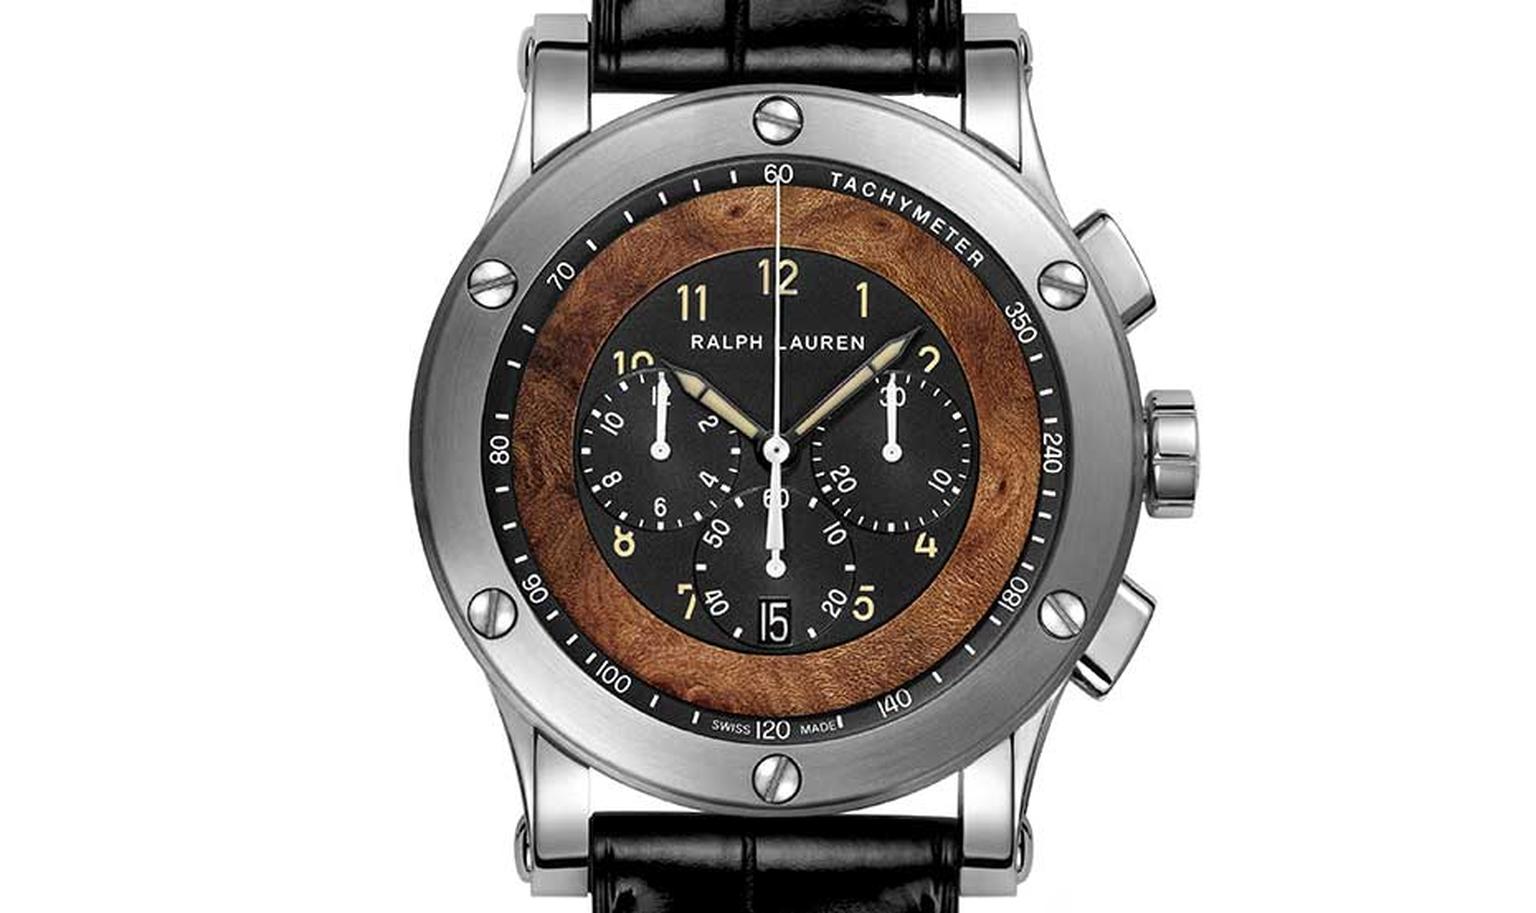 The dial of the Ralph Lauren Automotive Chronograph incorporates brown elm burl wood, the same that is featured on the dashboard of the vintage car.